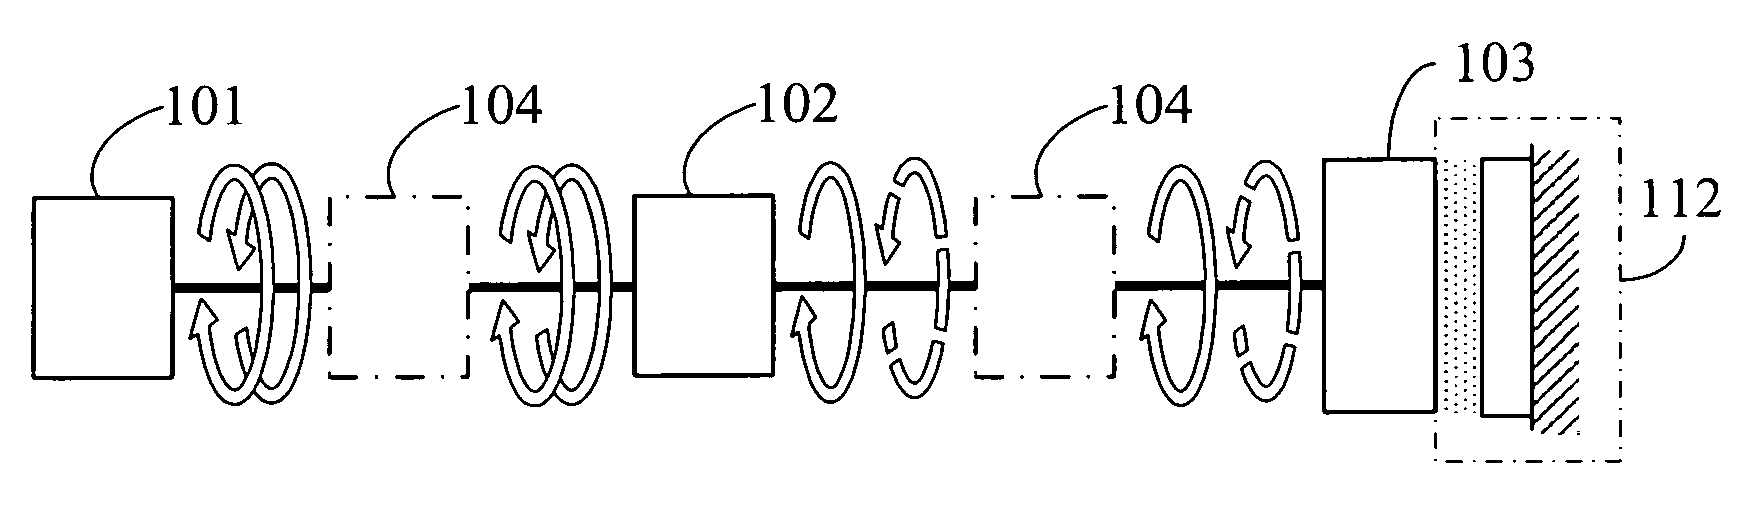 Bidirectional different speed ratio driving device with bidirectional manpower input